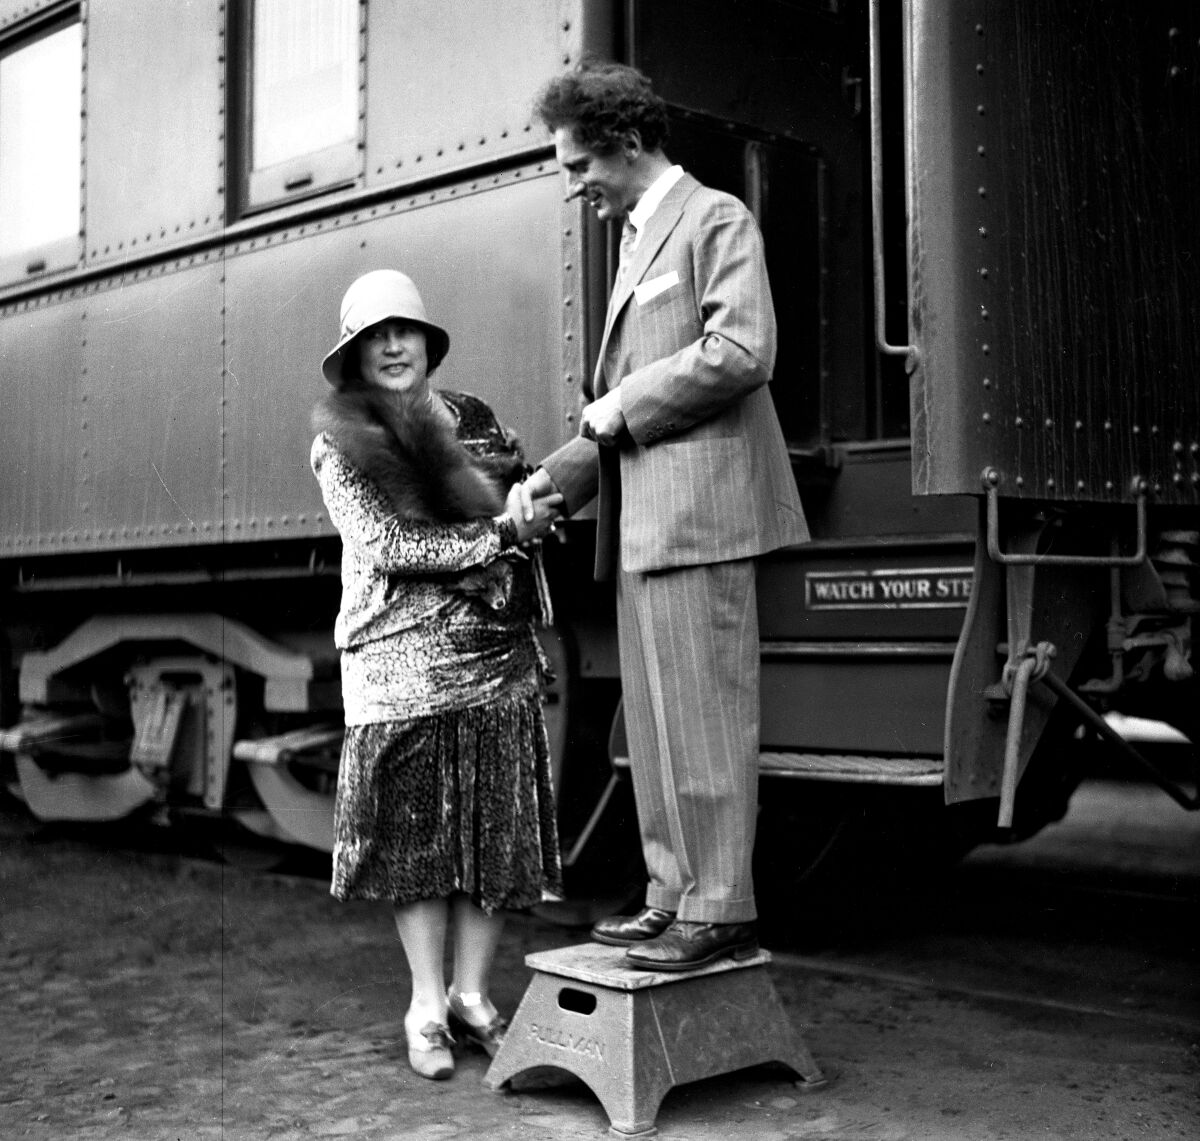 A man descending a train stands on a step stool and holds a woman's hands.